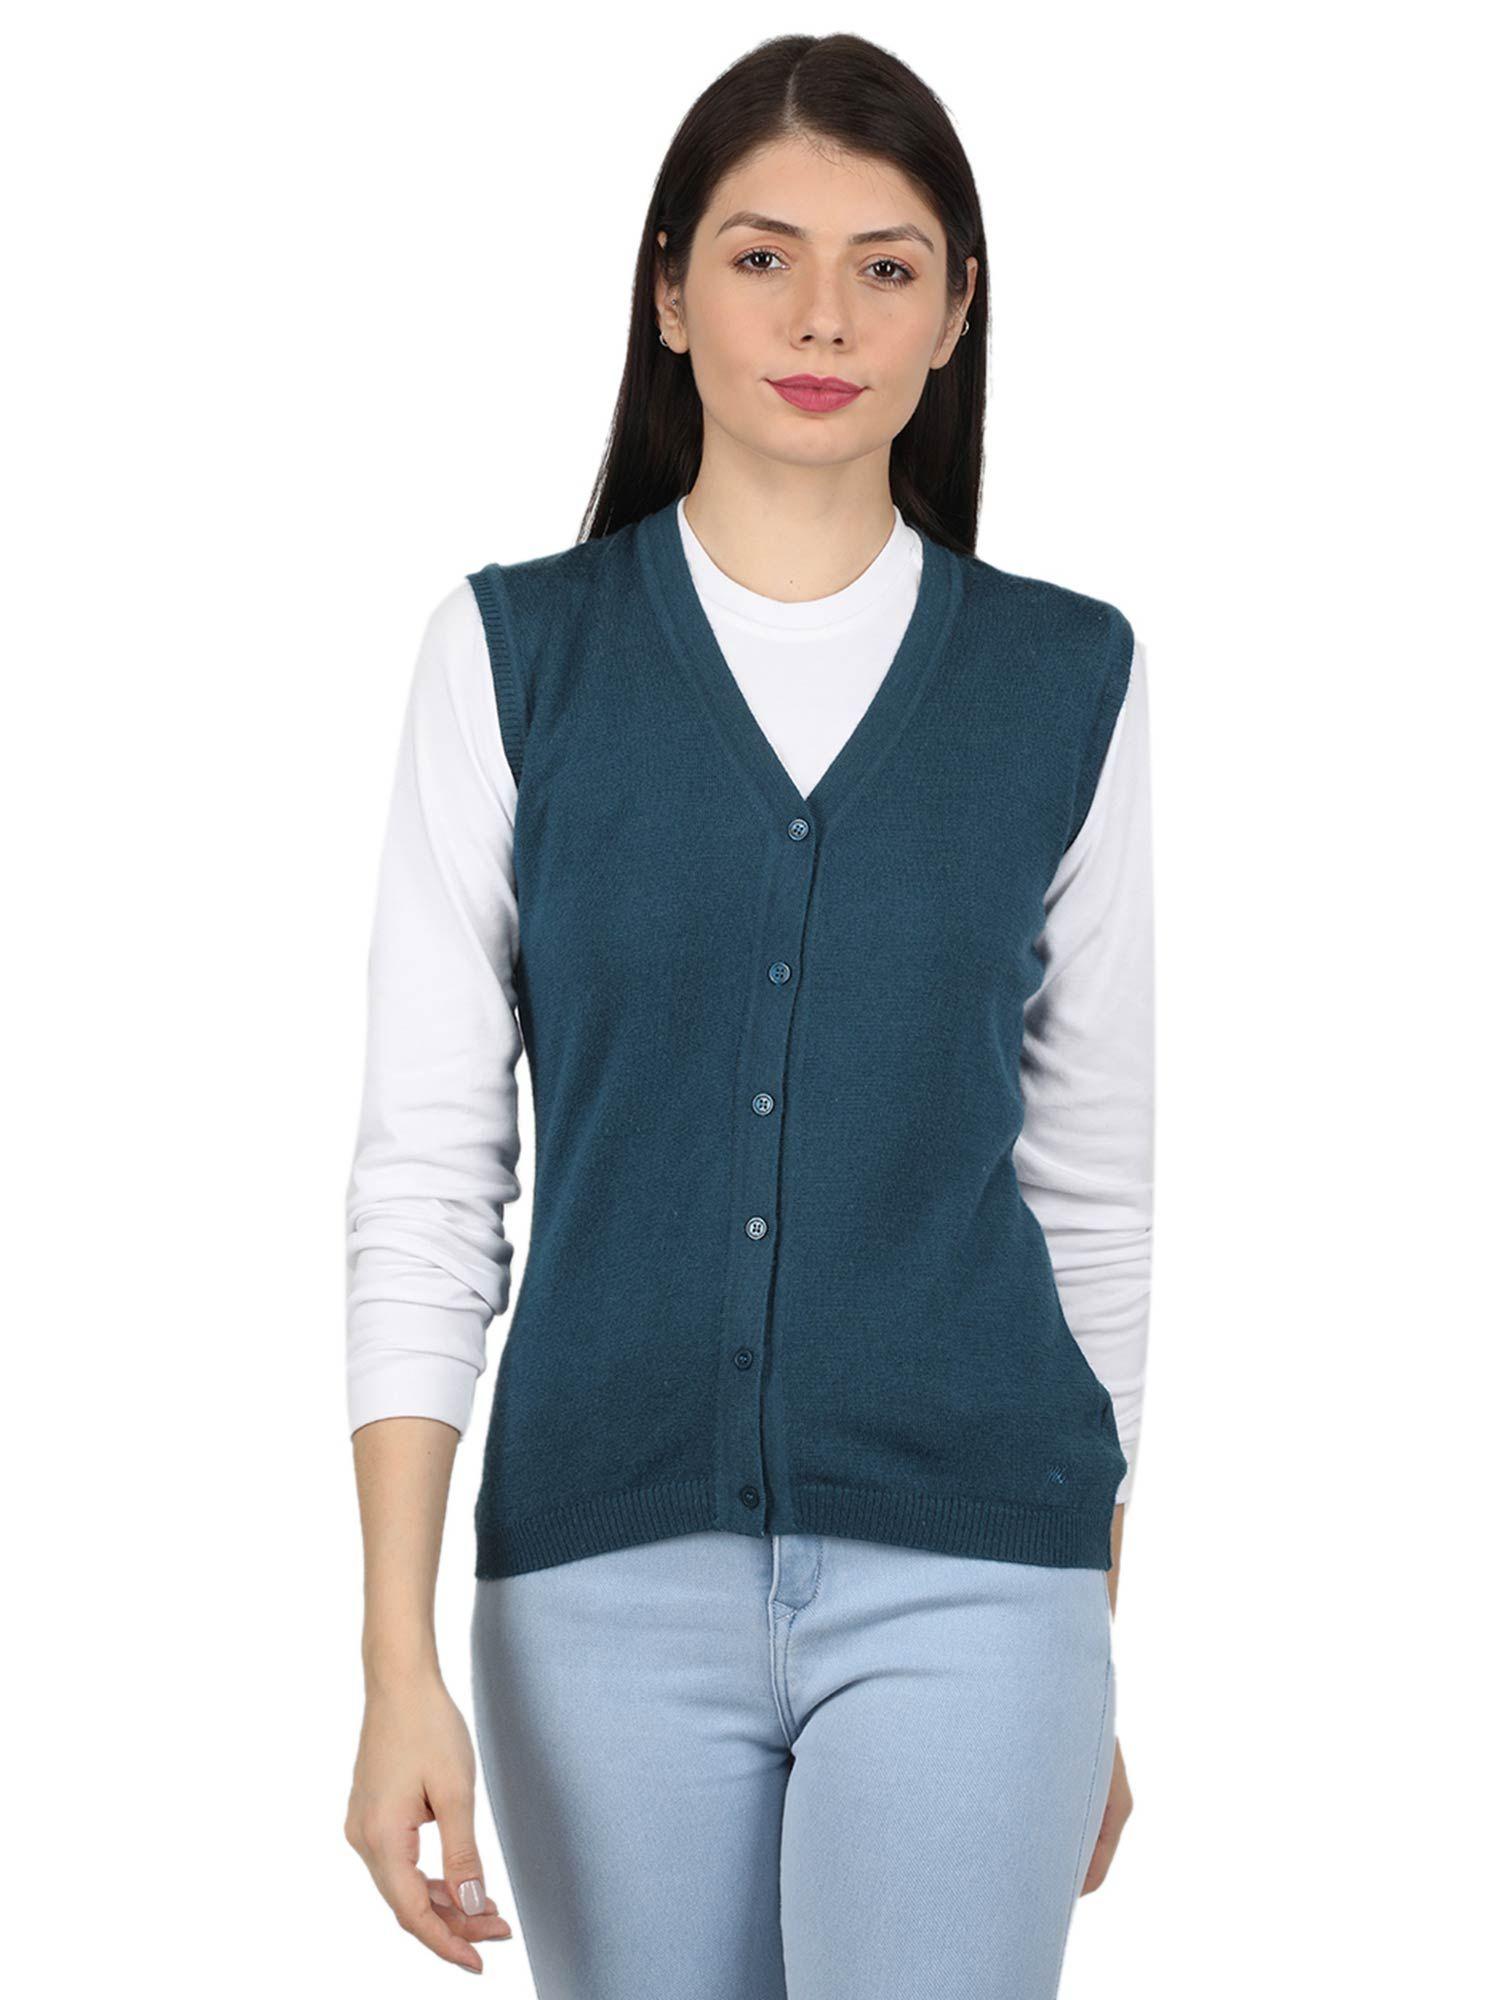 womens modal nylon teal solid round neck cardigan